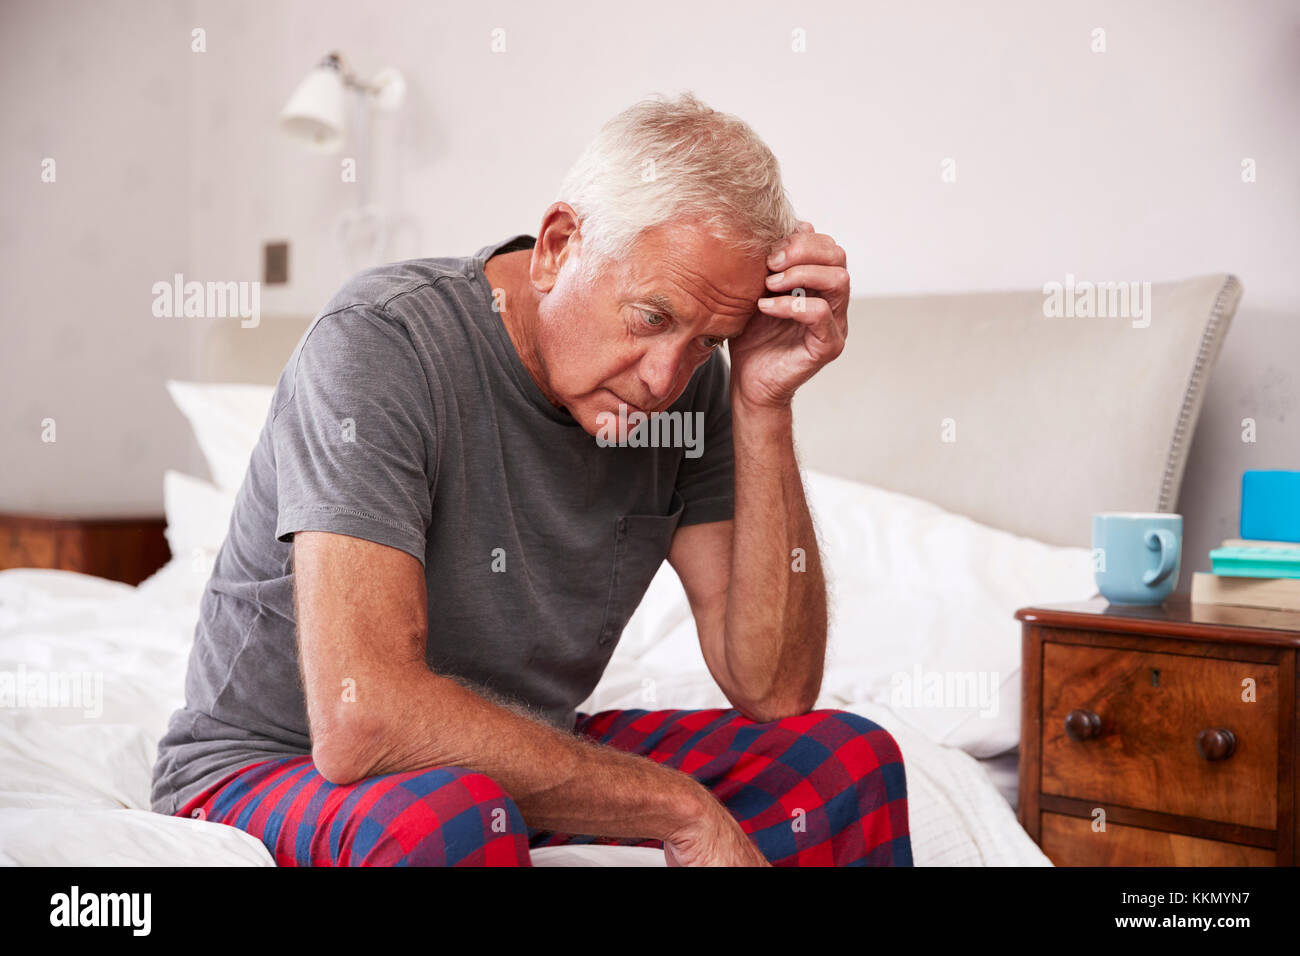 Senior Man Sitting On Bed At Home Suffering From Depression Stock Photo